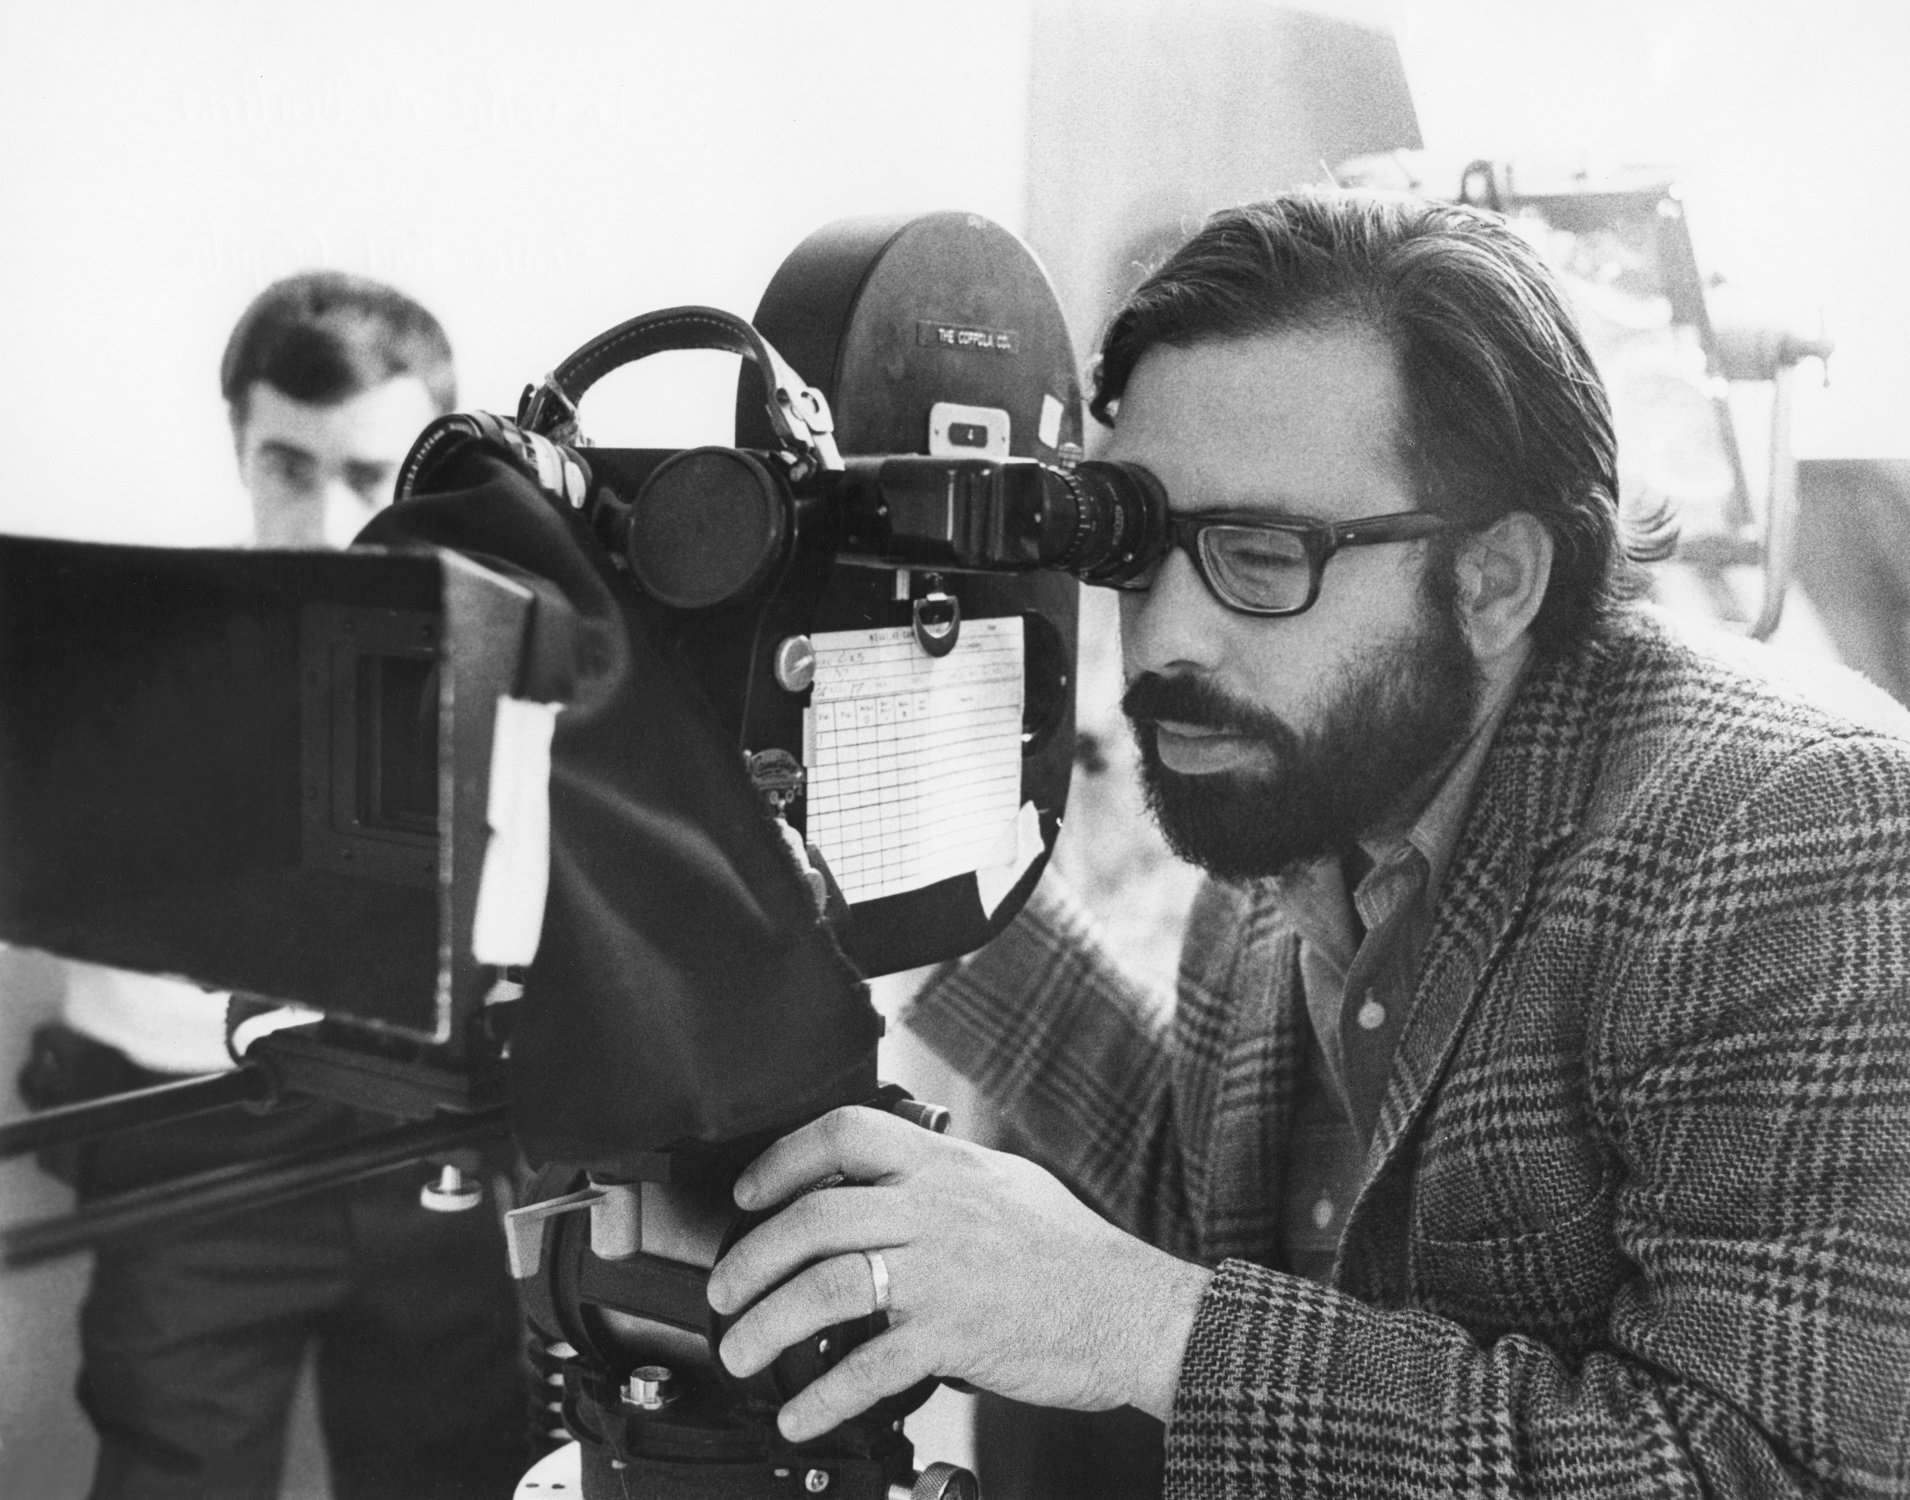 Francis Ford Coppola: 'Barbie,' 'Oppenheimer' Are Victories for Cinema